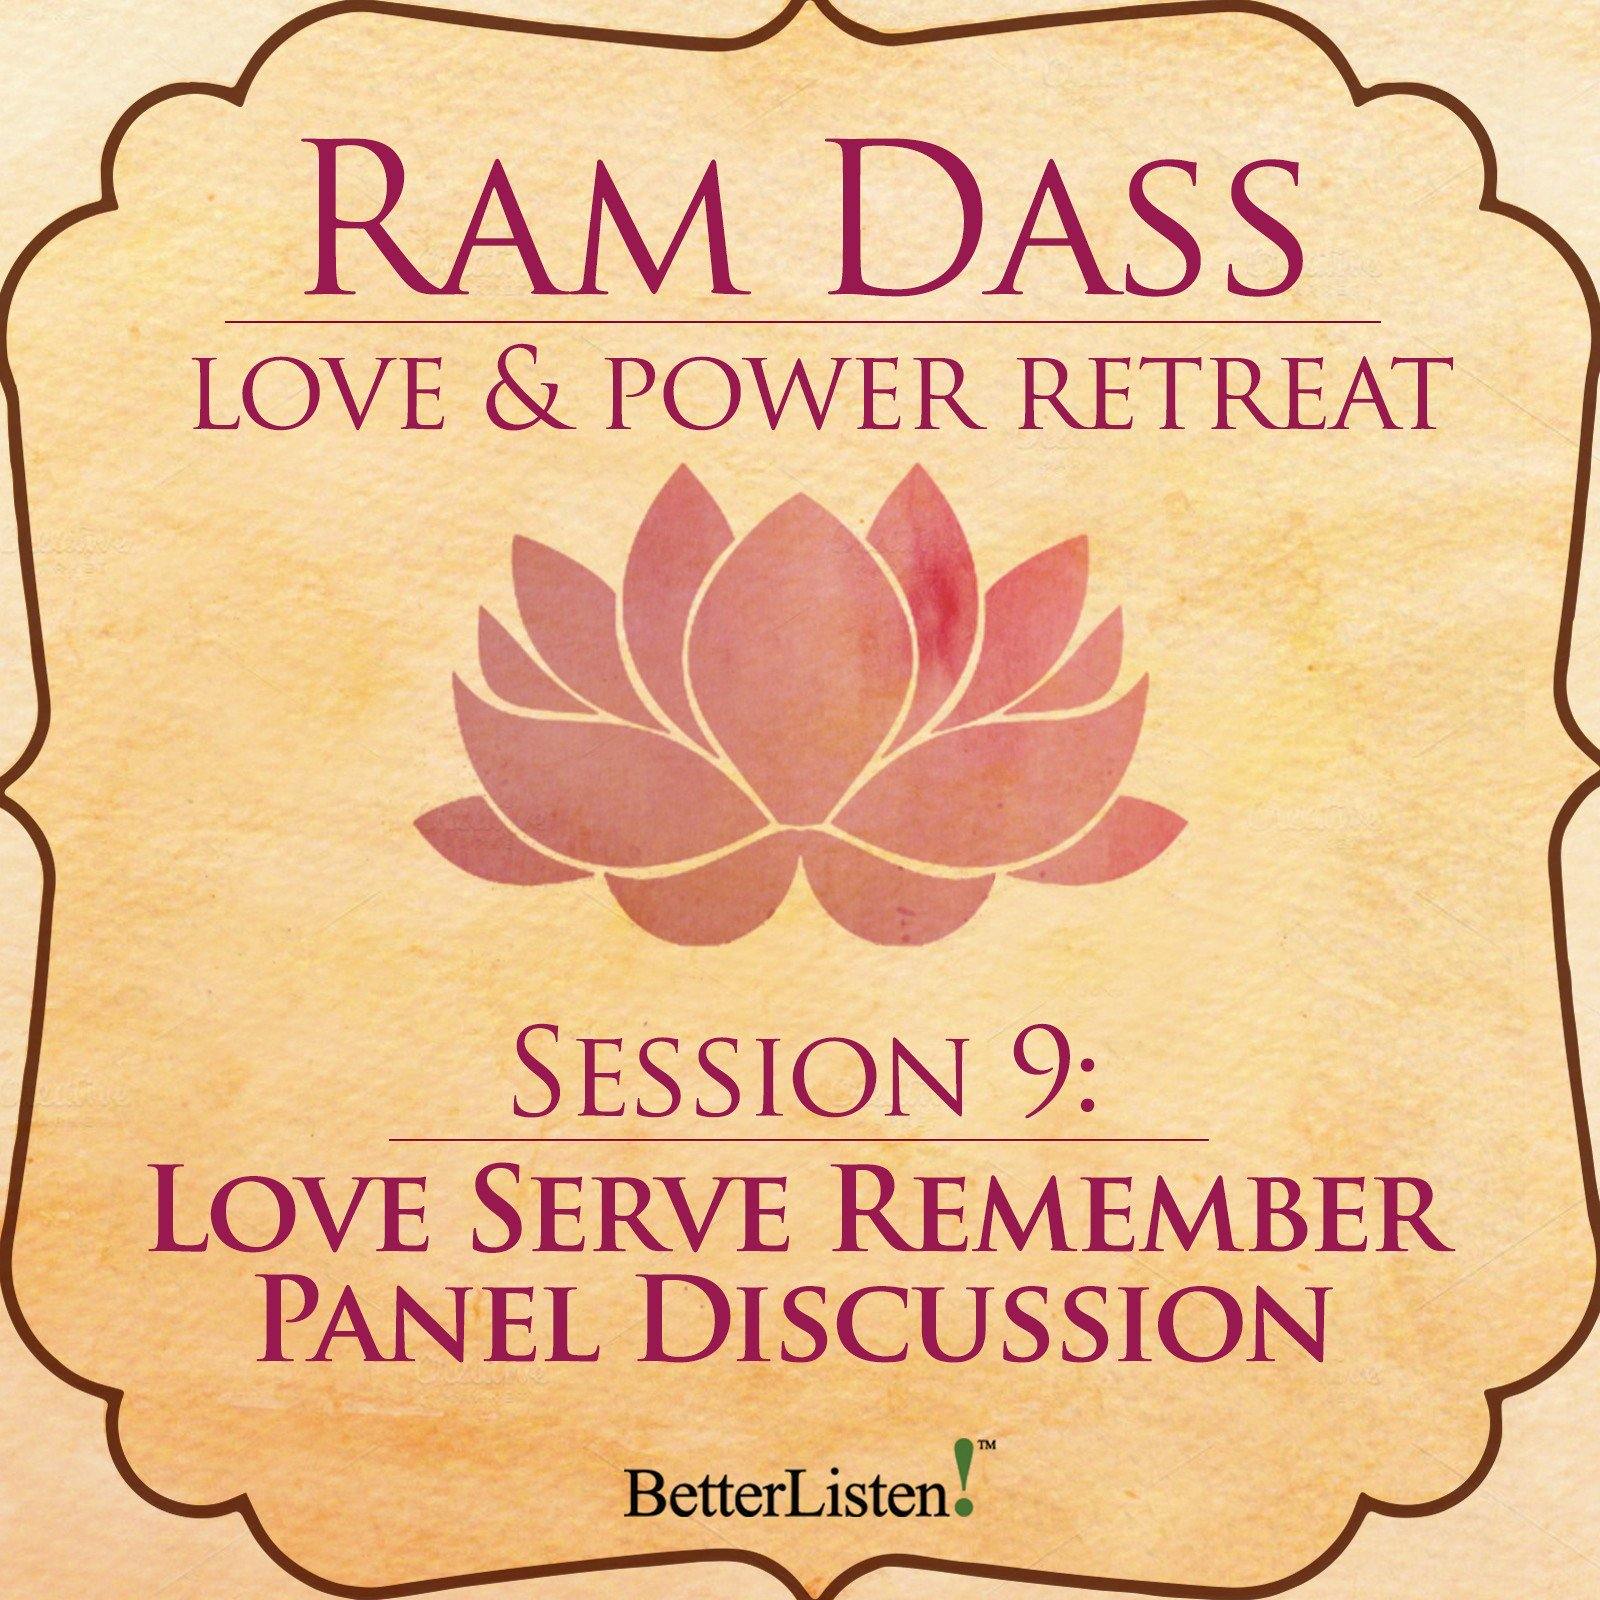 Love Serve Remember Panel Discussion Part 2 from the Love and Power Retreat Audio Program Ram Dass LSR - BetterListen!